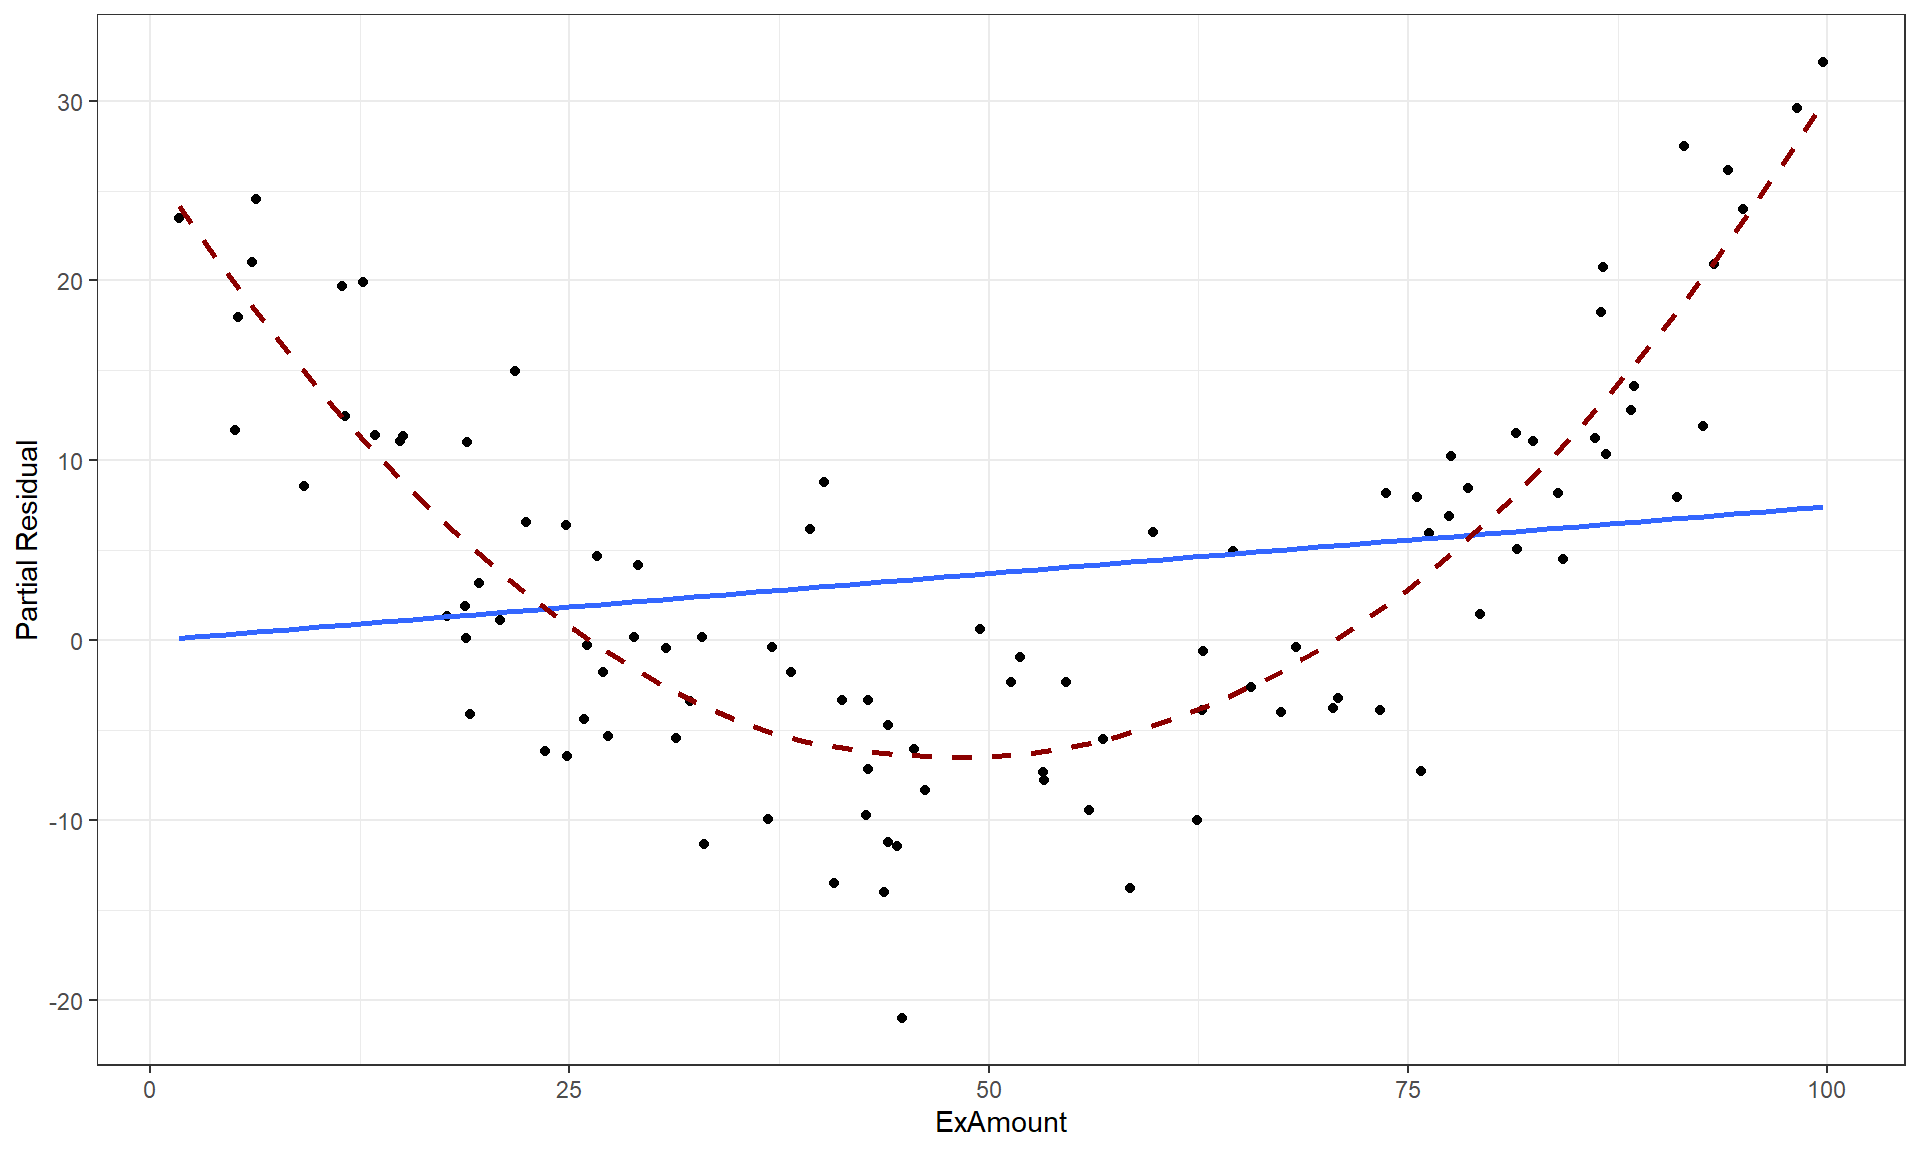 Plot of partial residual for ExAmount with the solid line for the MLR fit for this model component and the dashed line for the smoothing line that highlights the curvilinear relationship that the model failed to account for.